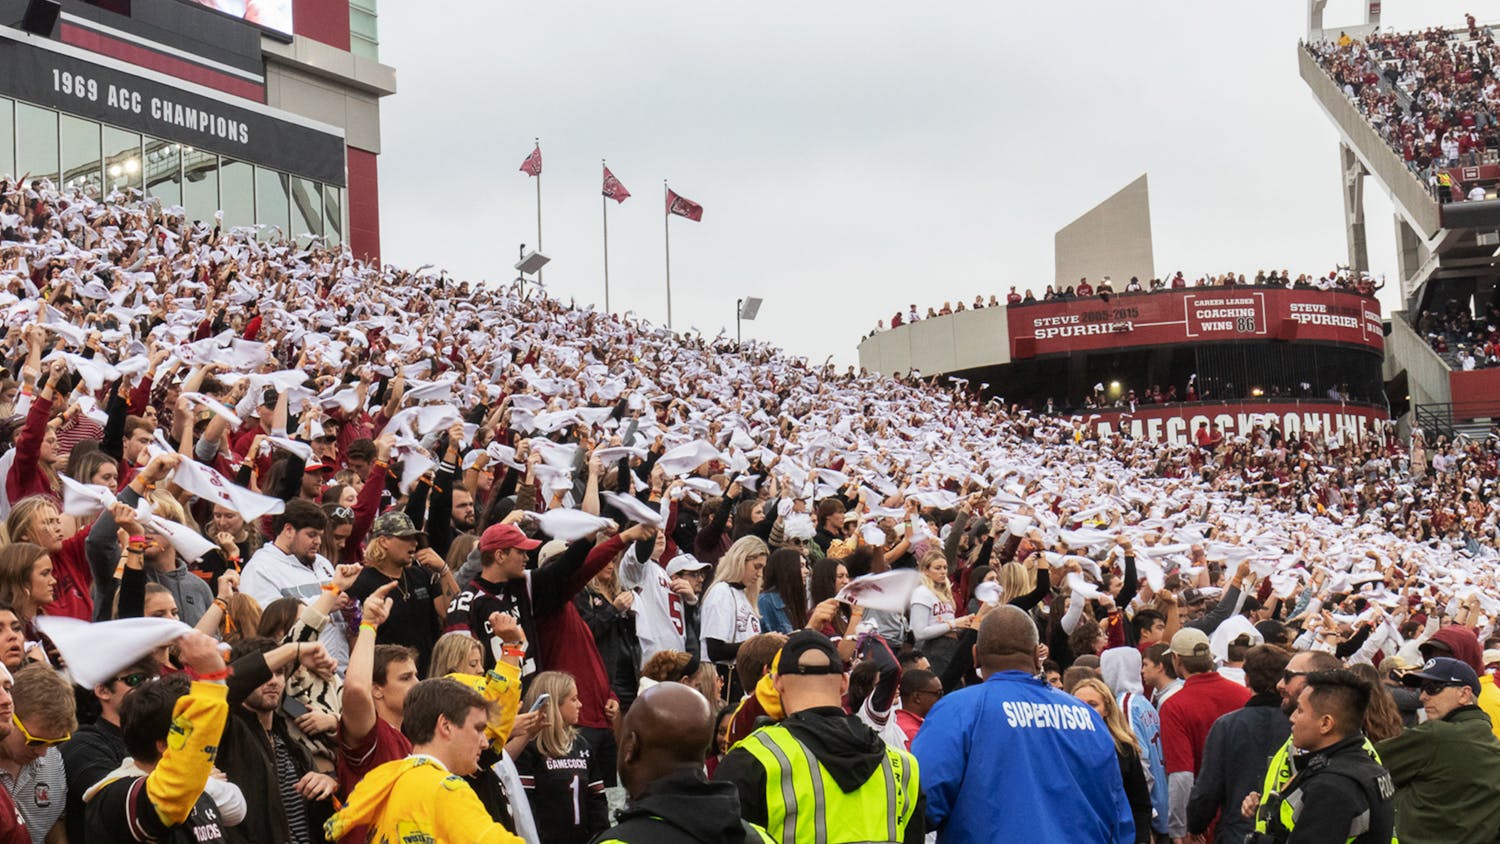 FILE — The University of South Carolina's student section spins rally towels as "Sandstorm" plays over the loudspeakers on Oct. 29, 2022. The Gamecocks lost to the University of Missouri Tigers 23-10.